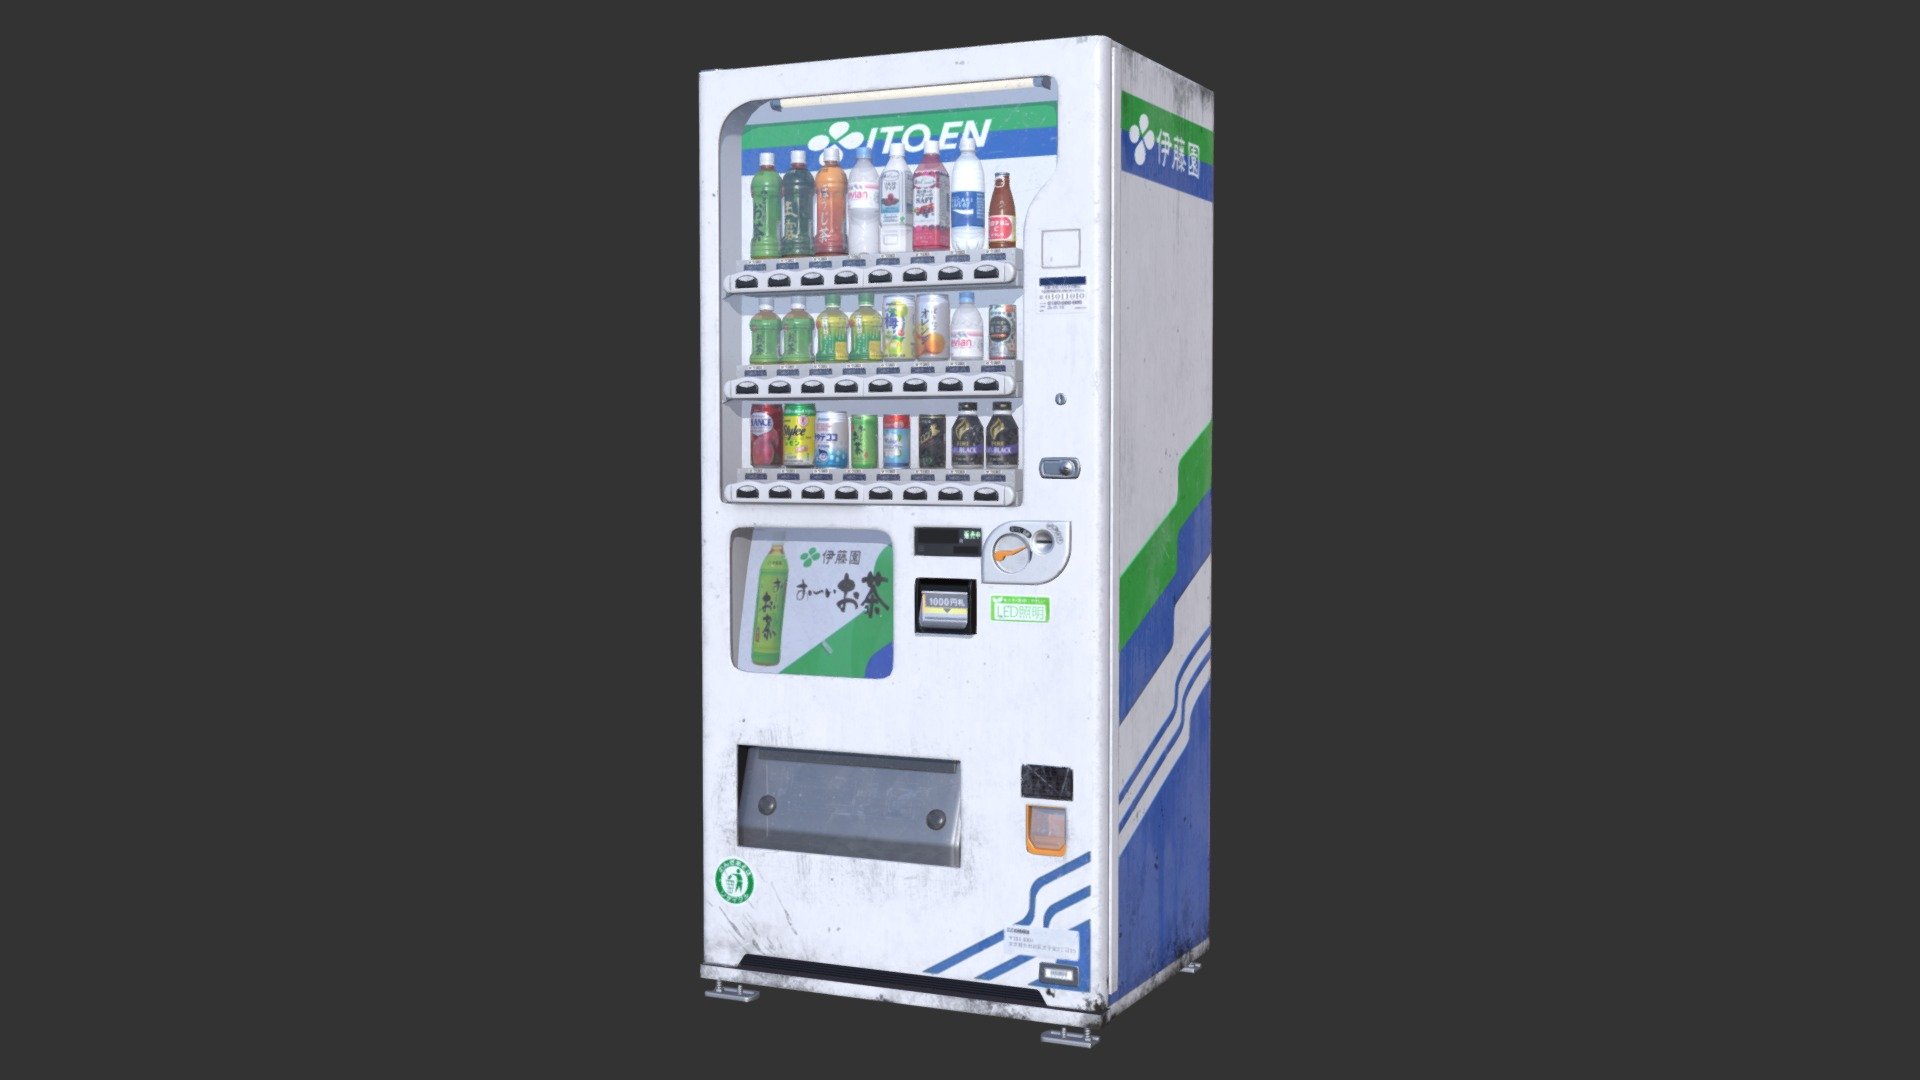 New skin for my vending machine and new drinks, to reflect Ito En style vending machines and beverages. Created for use in a Japanese parking lot scene I created: https://www.artstation.com/artwork/B3zPY6

Modeled in Maya 

Baked in Marmoset Toolbag 3 + Substance Painter

Textured in Substance Painter + Photoshop - Ito En Japanese Vending Machine - 3D model by gg_3d_art 3d model